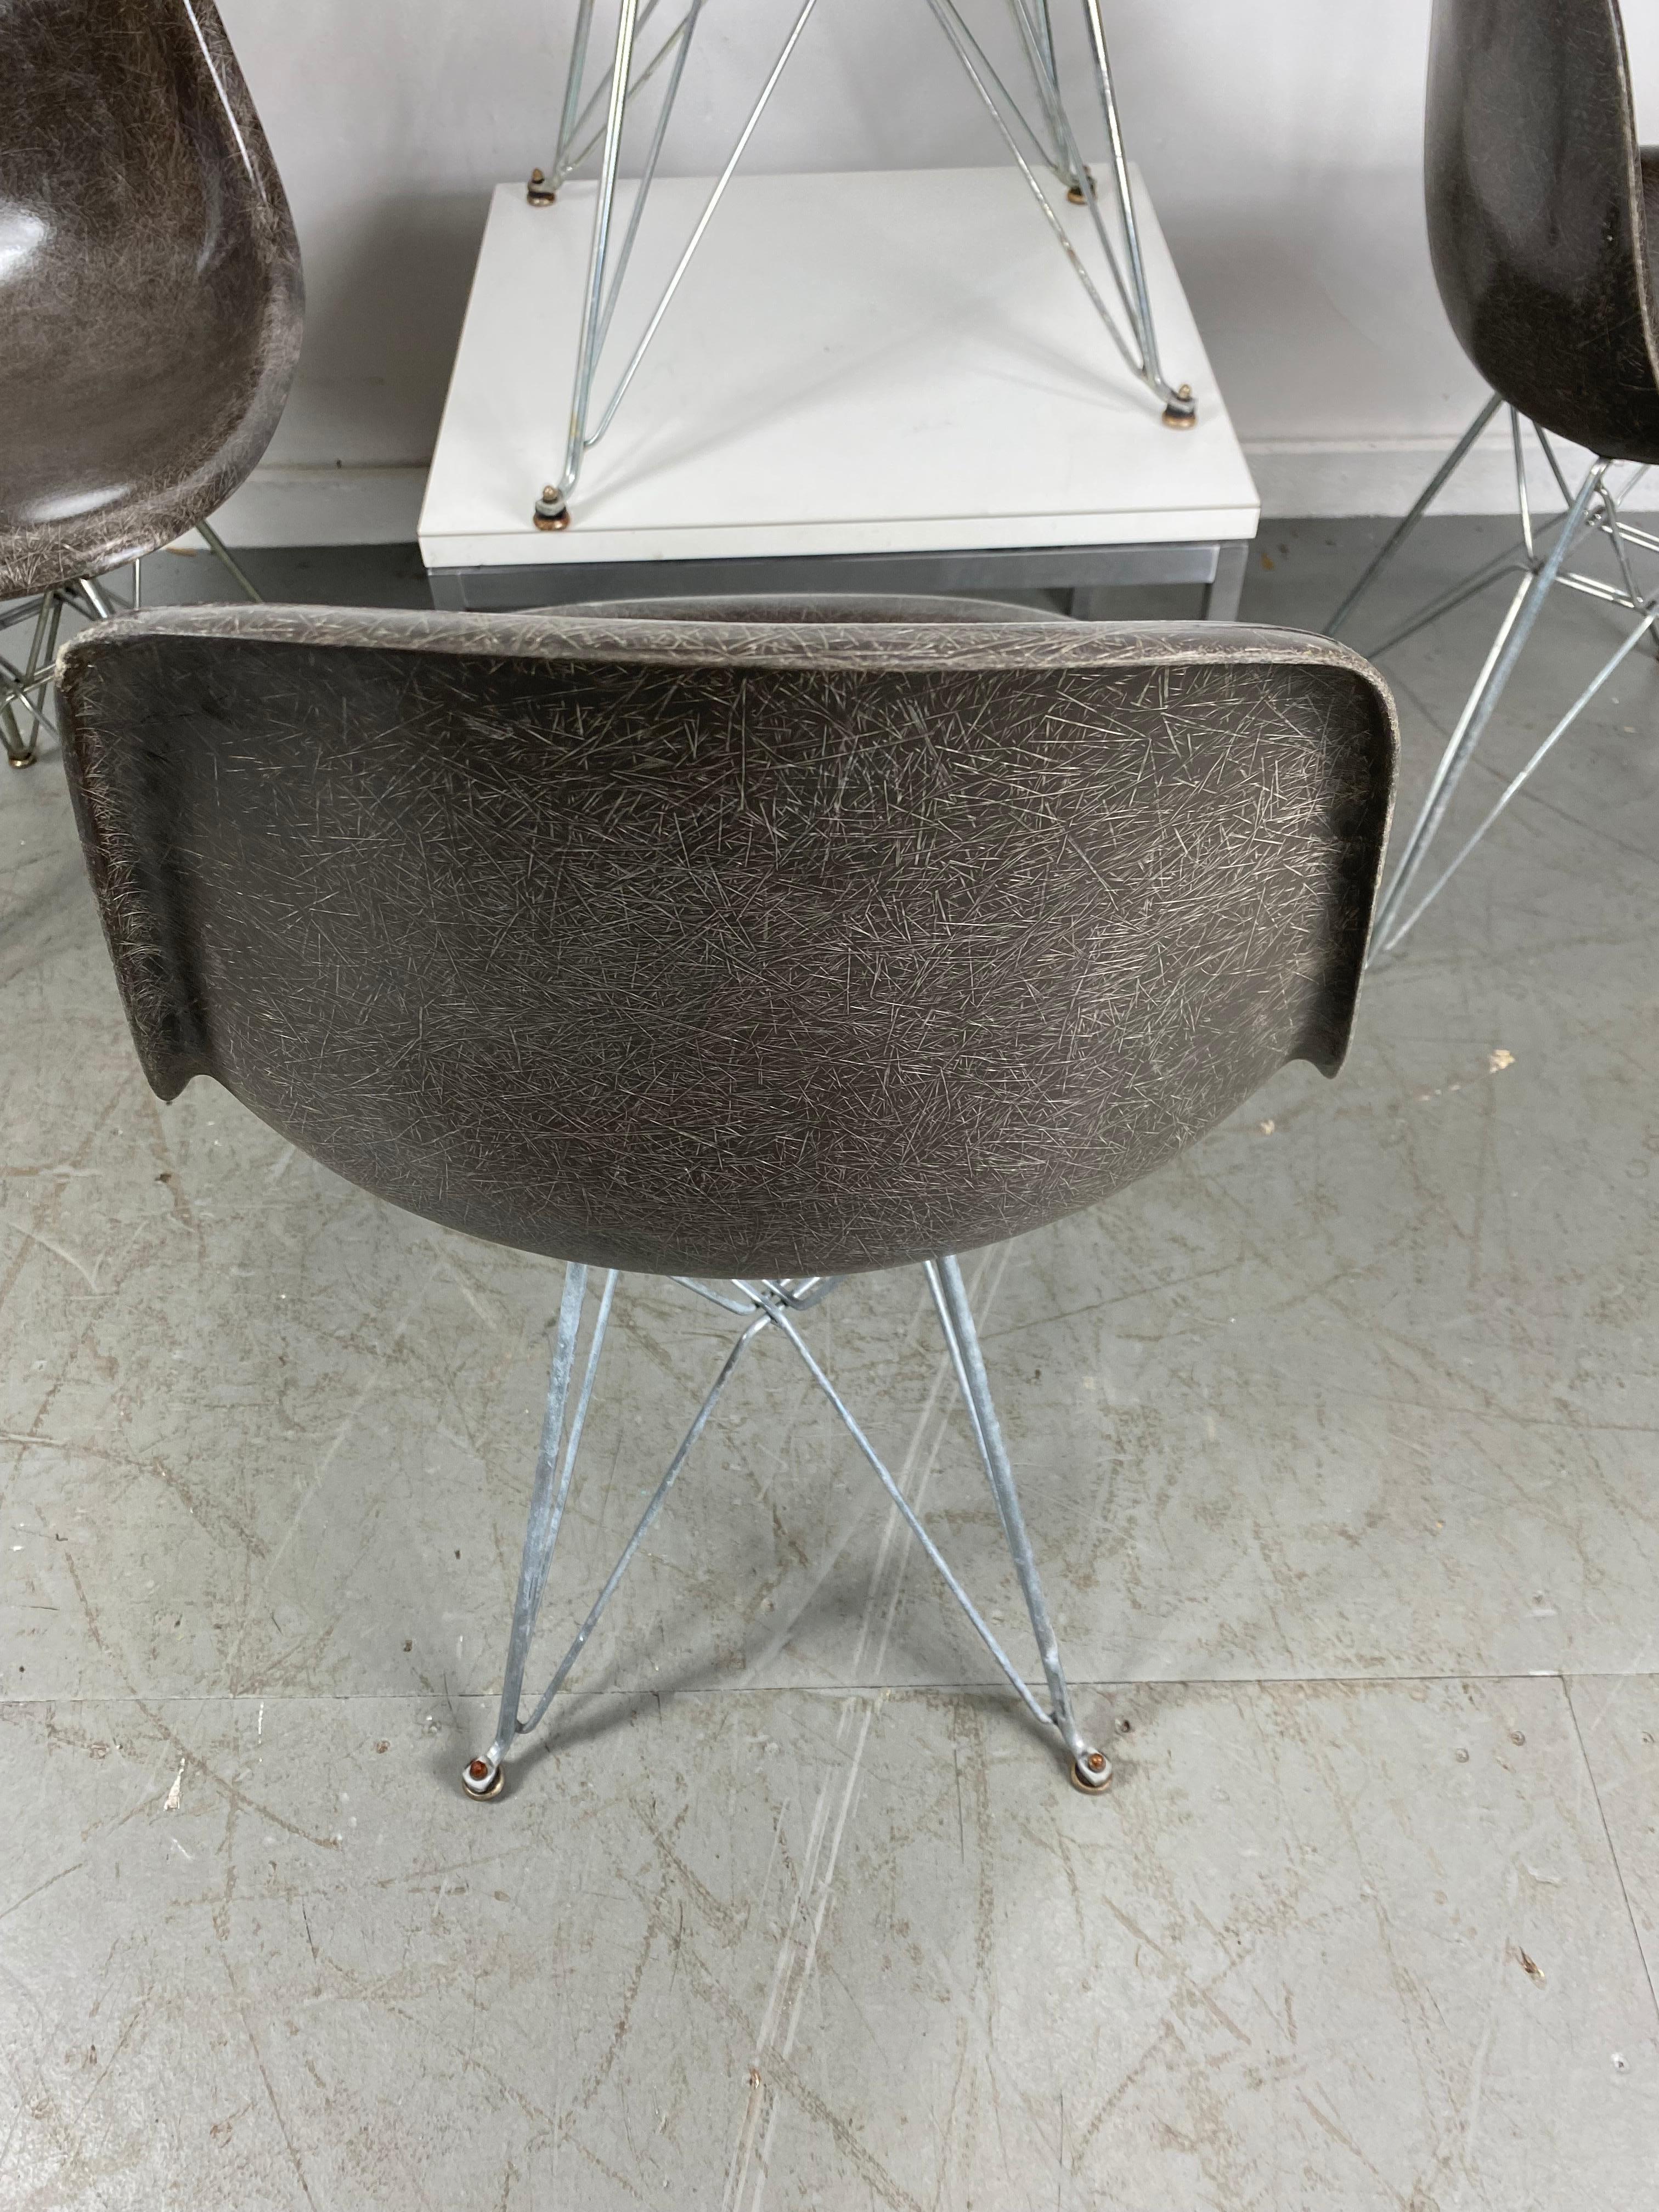 Nice early gray patina on a set of 4 Charles and Ray Eames fiberglass shell chairs. Wonderfull exposed fibers, earlier production with original slotted screws attaching Eiffel tower bases with original early foot (glides).